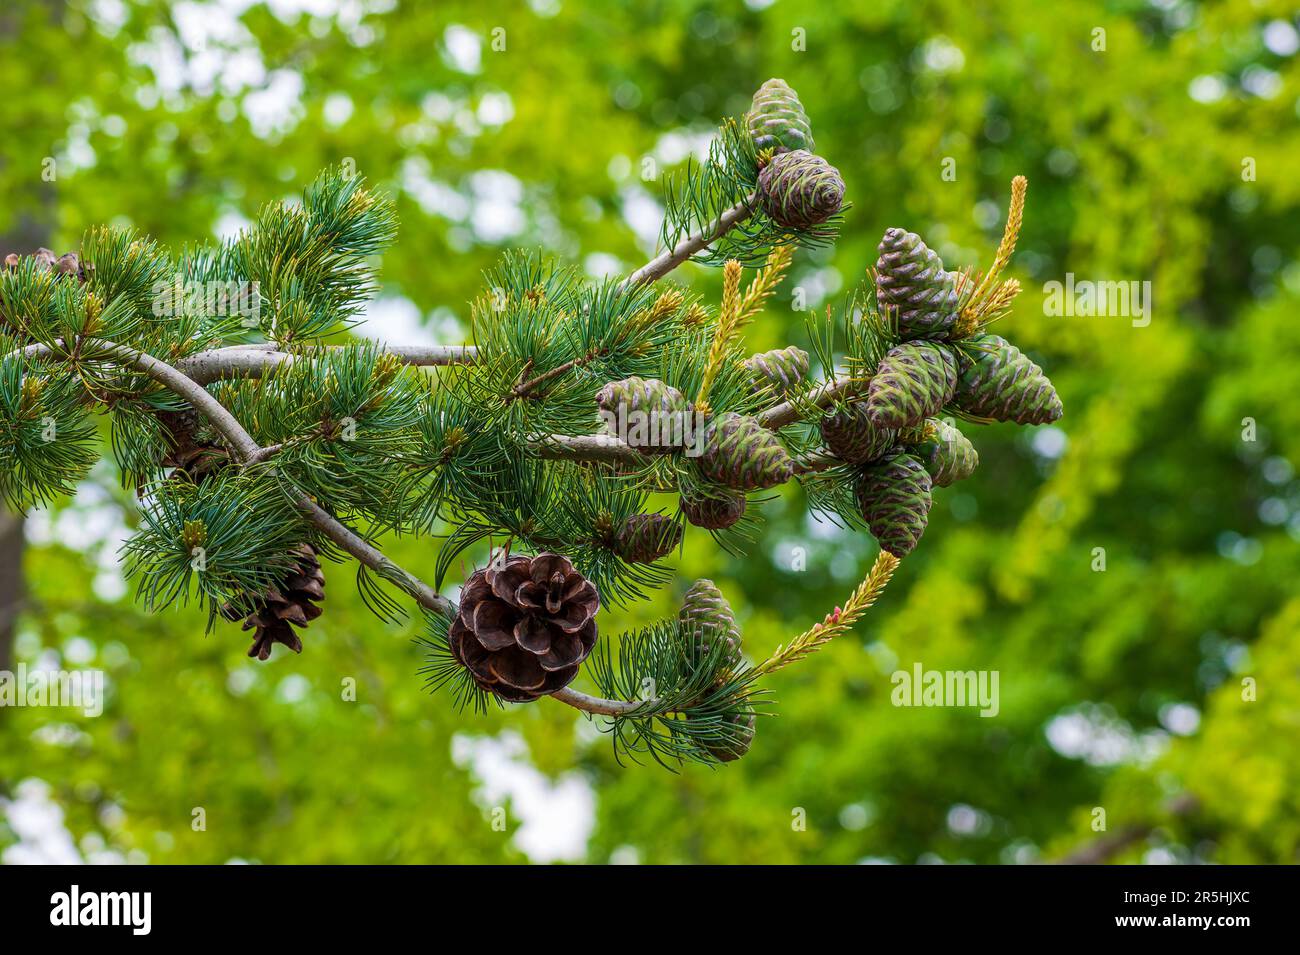 Japanese pine tree – closeup of a branch with developing and mature cones. New England Botanic Garden at Tower Hill, Boylston, Massachusetts Stock Photo